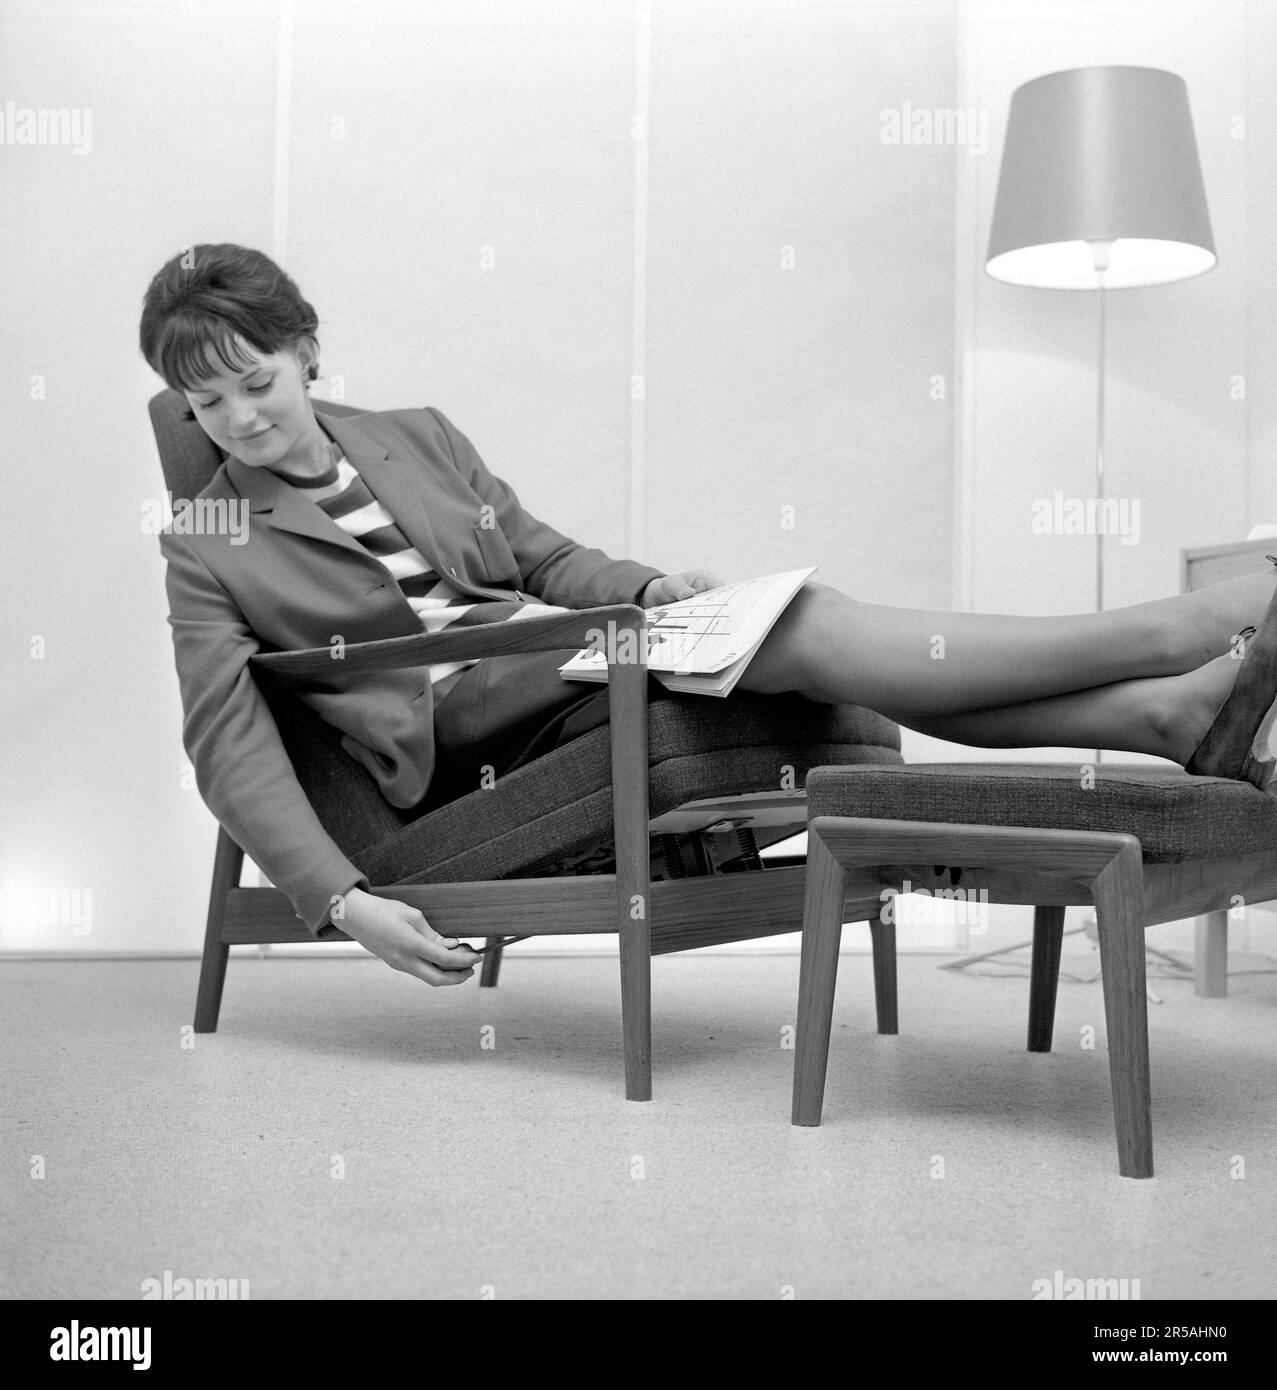 Home decor of the 1960s. A woman is sitting comfortably in a chair ...